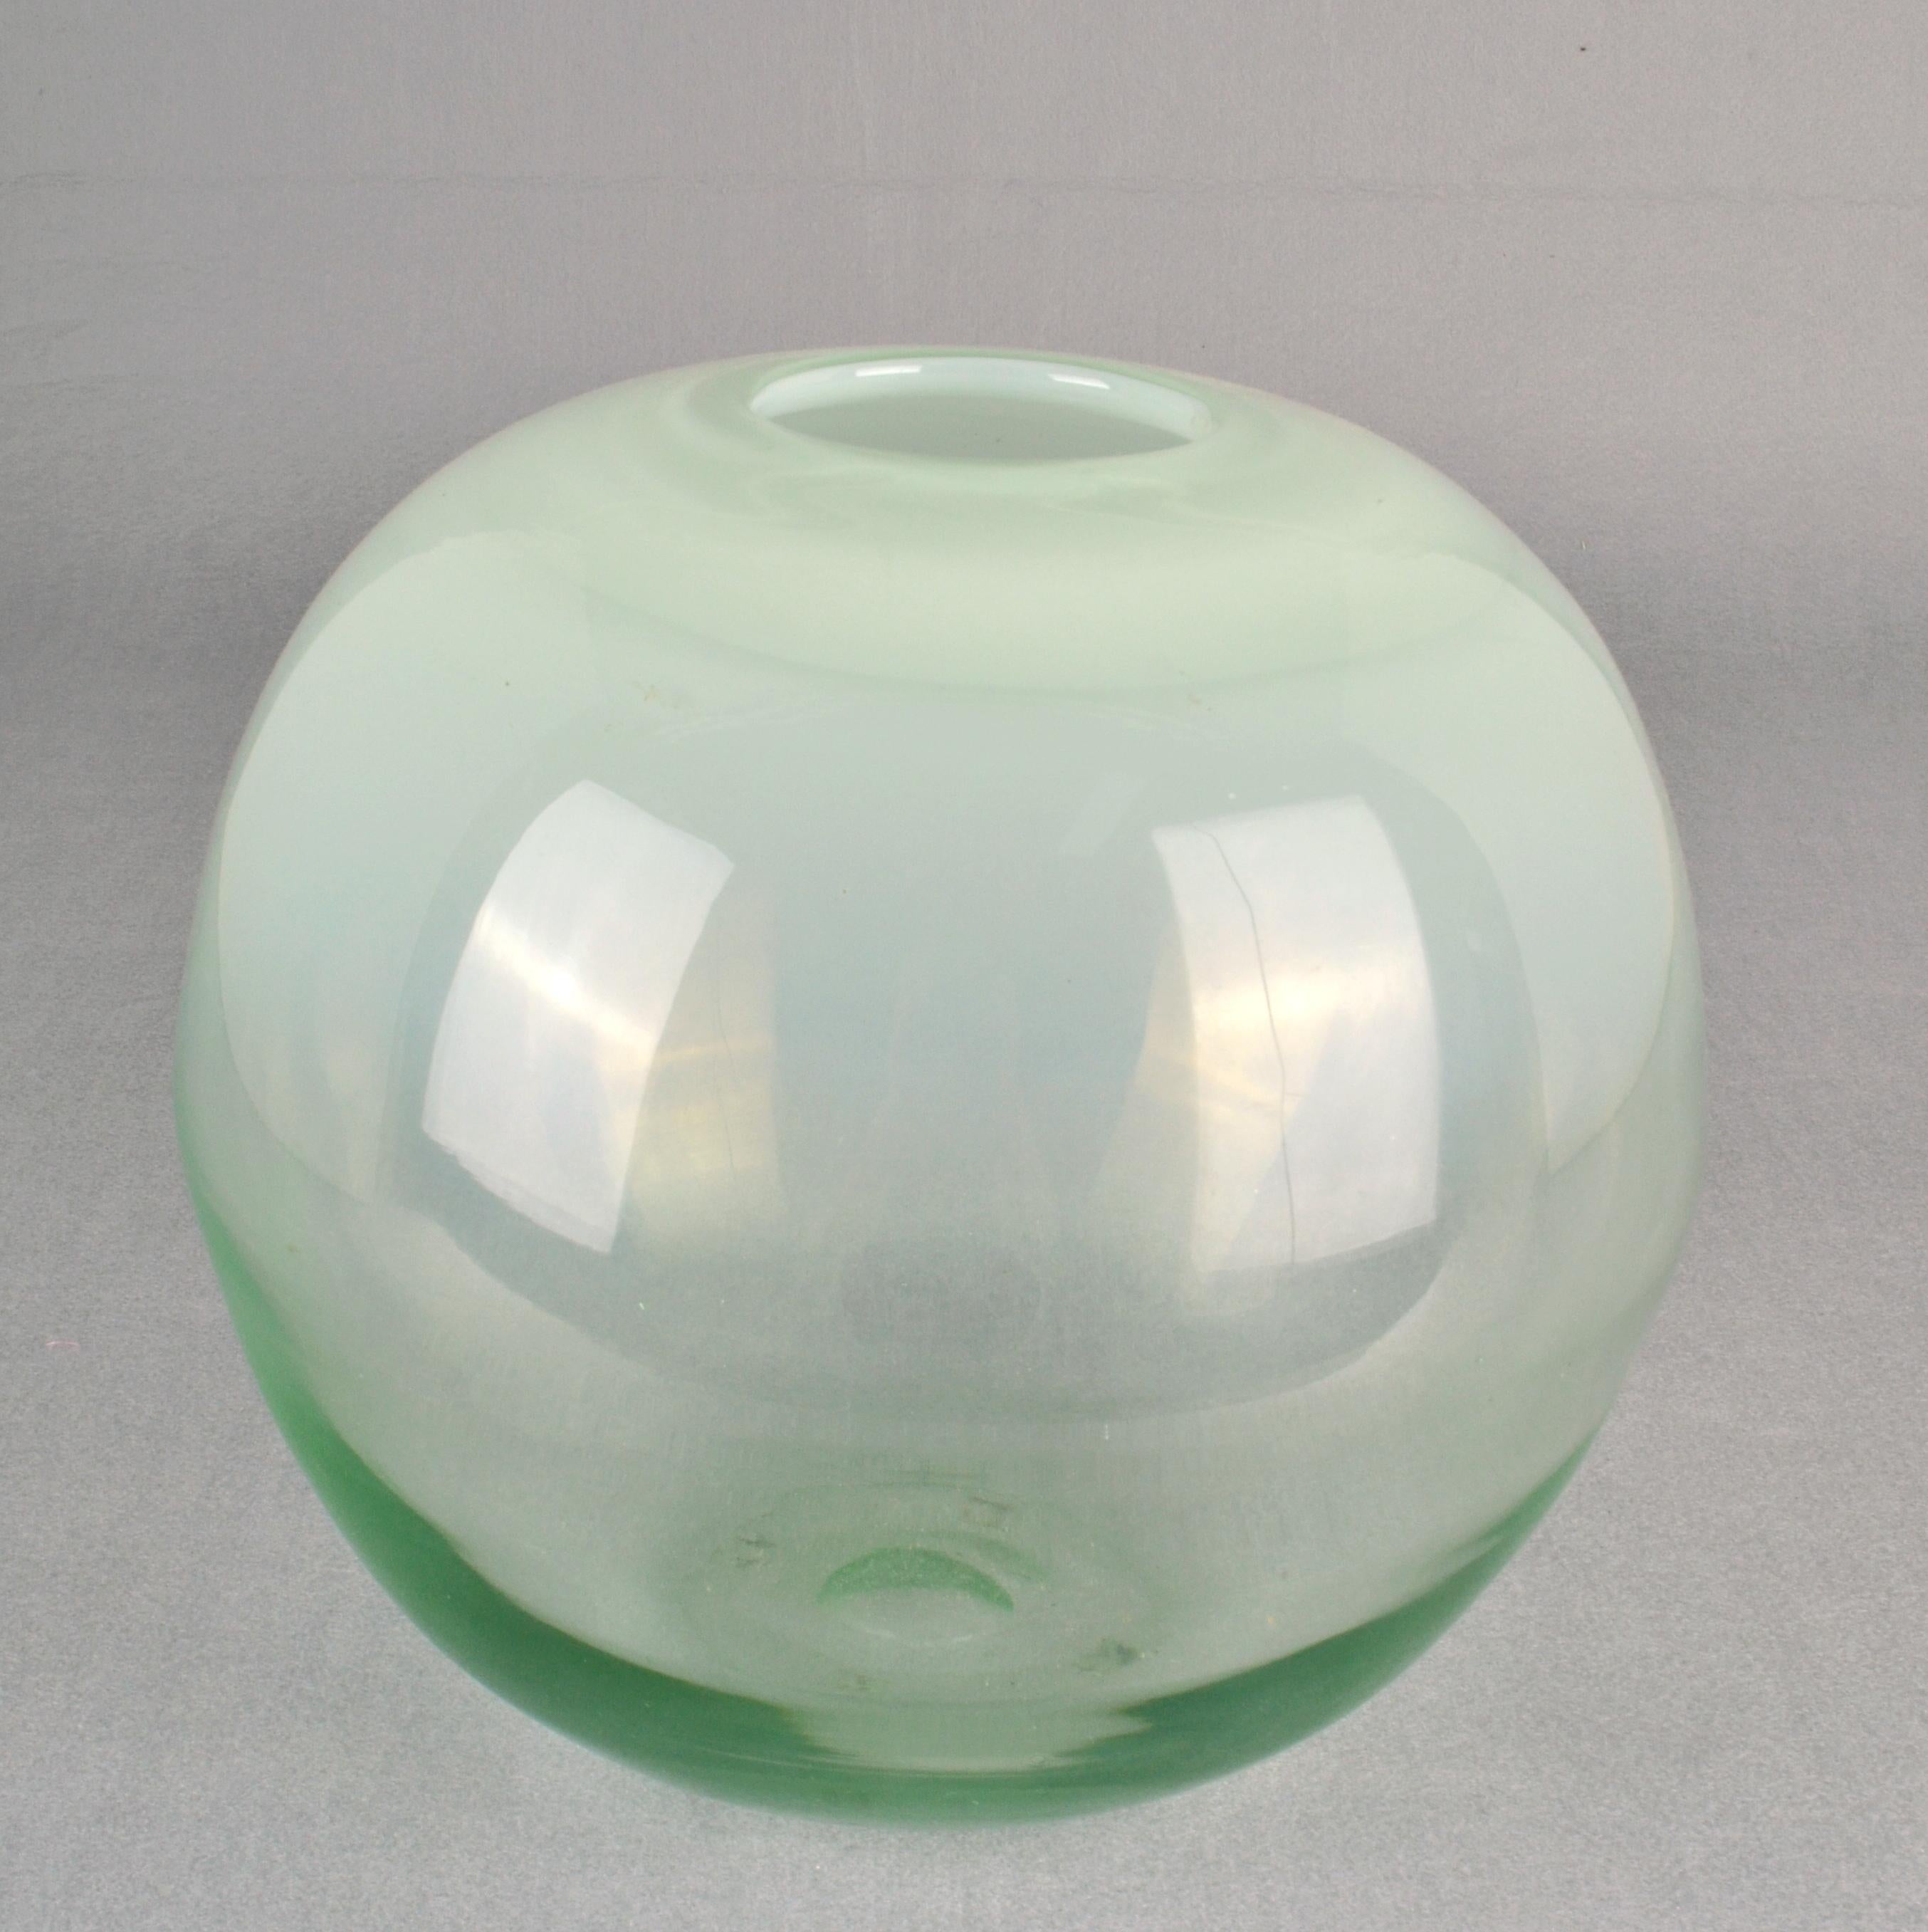 Hand blown heavy weighted ball vase in clear glass over flowing to opaline at the top and green at the bottom by Copier, at Leerdam glass works, The Netherlands 1960s. 
Glass maker and designer Andries Dirk Copier (1901-1991) is considered the most